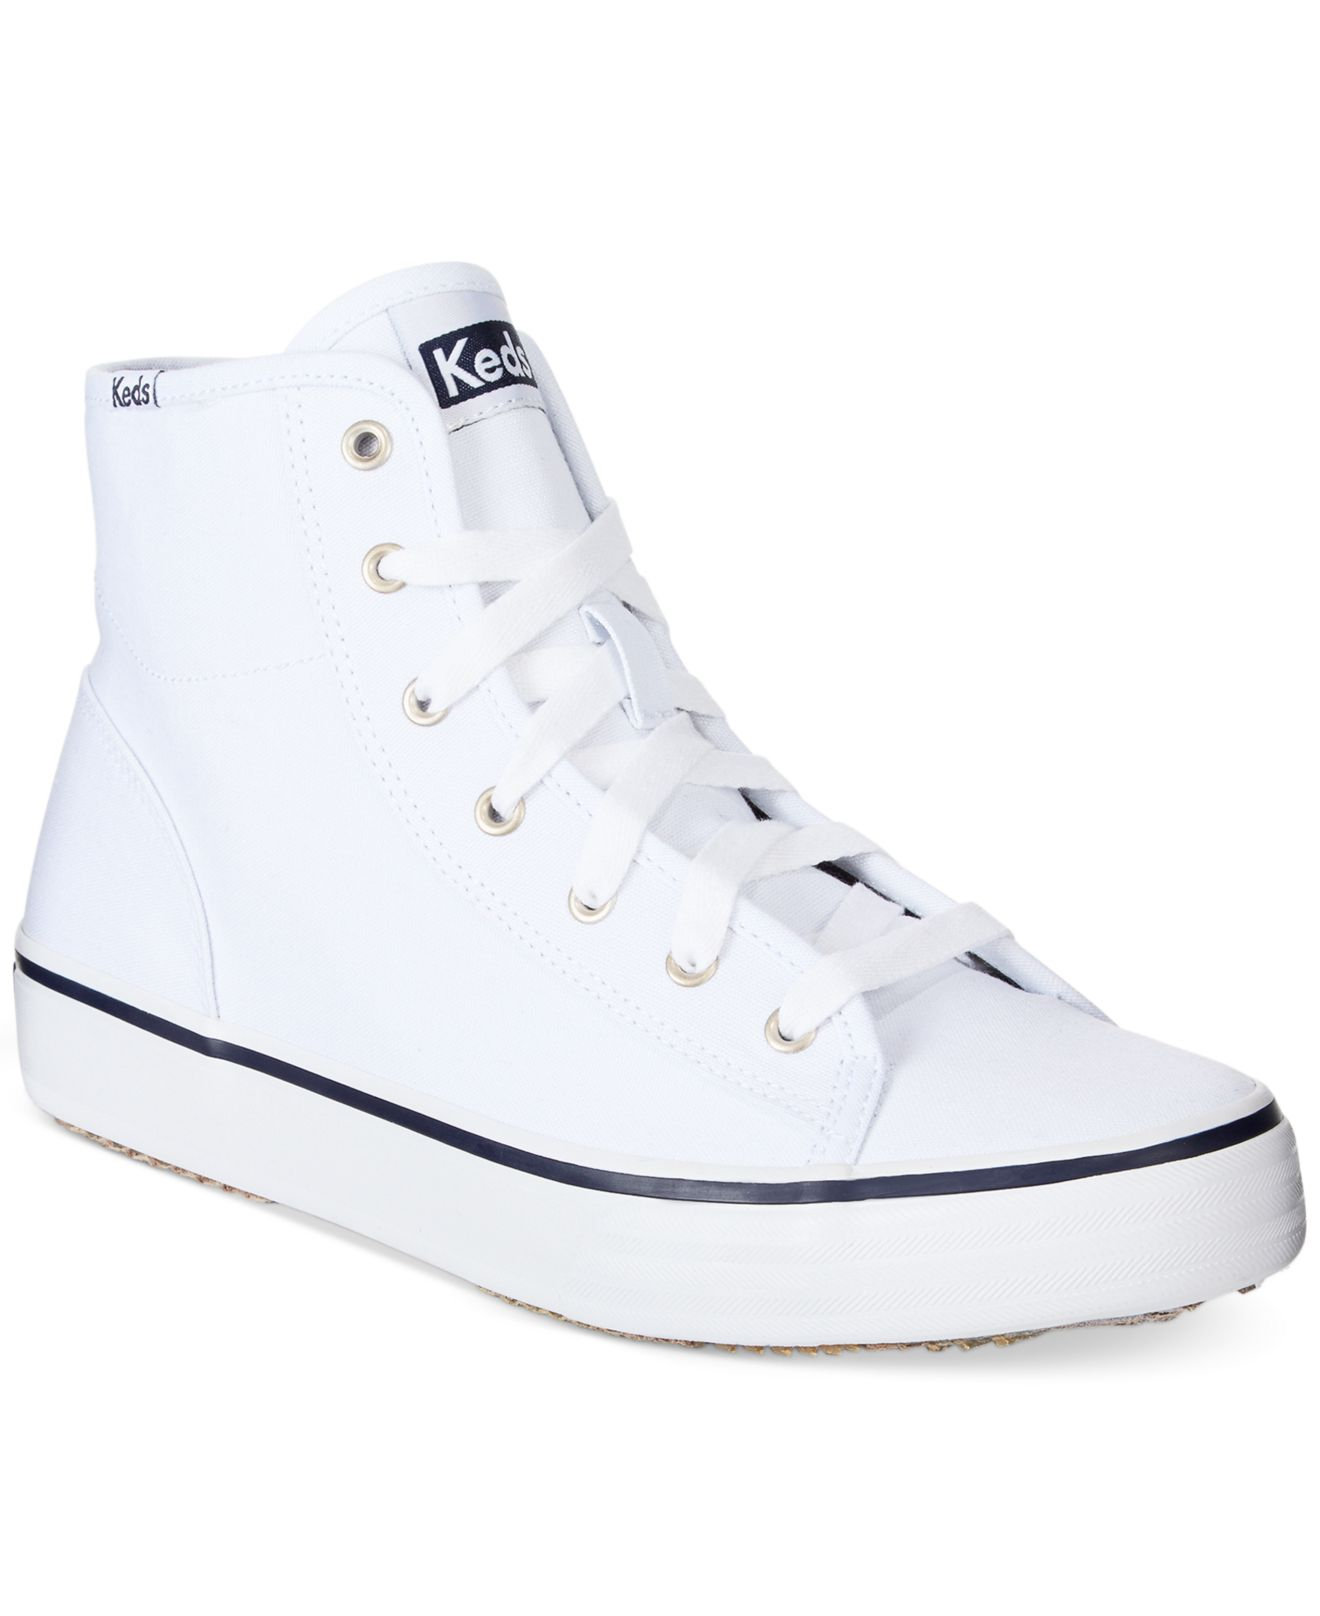 Keds Women'S Double Up High Top Sneakers in White | Lyst